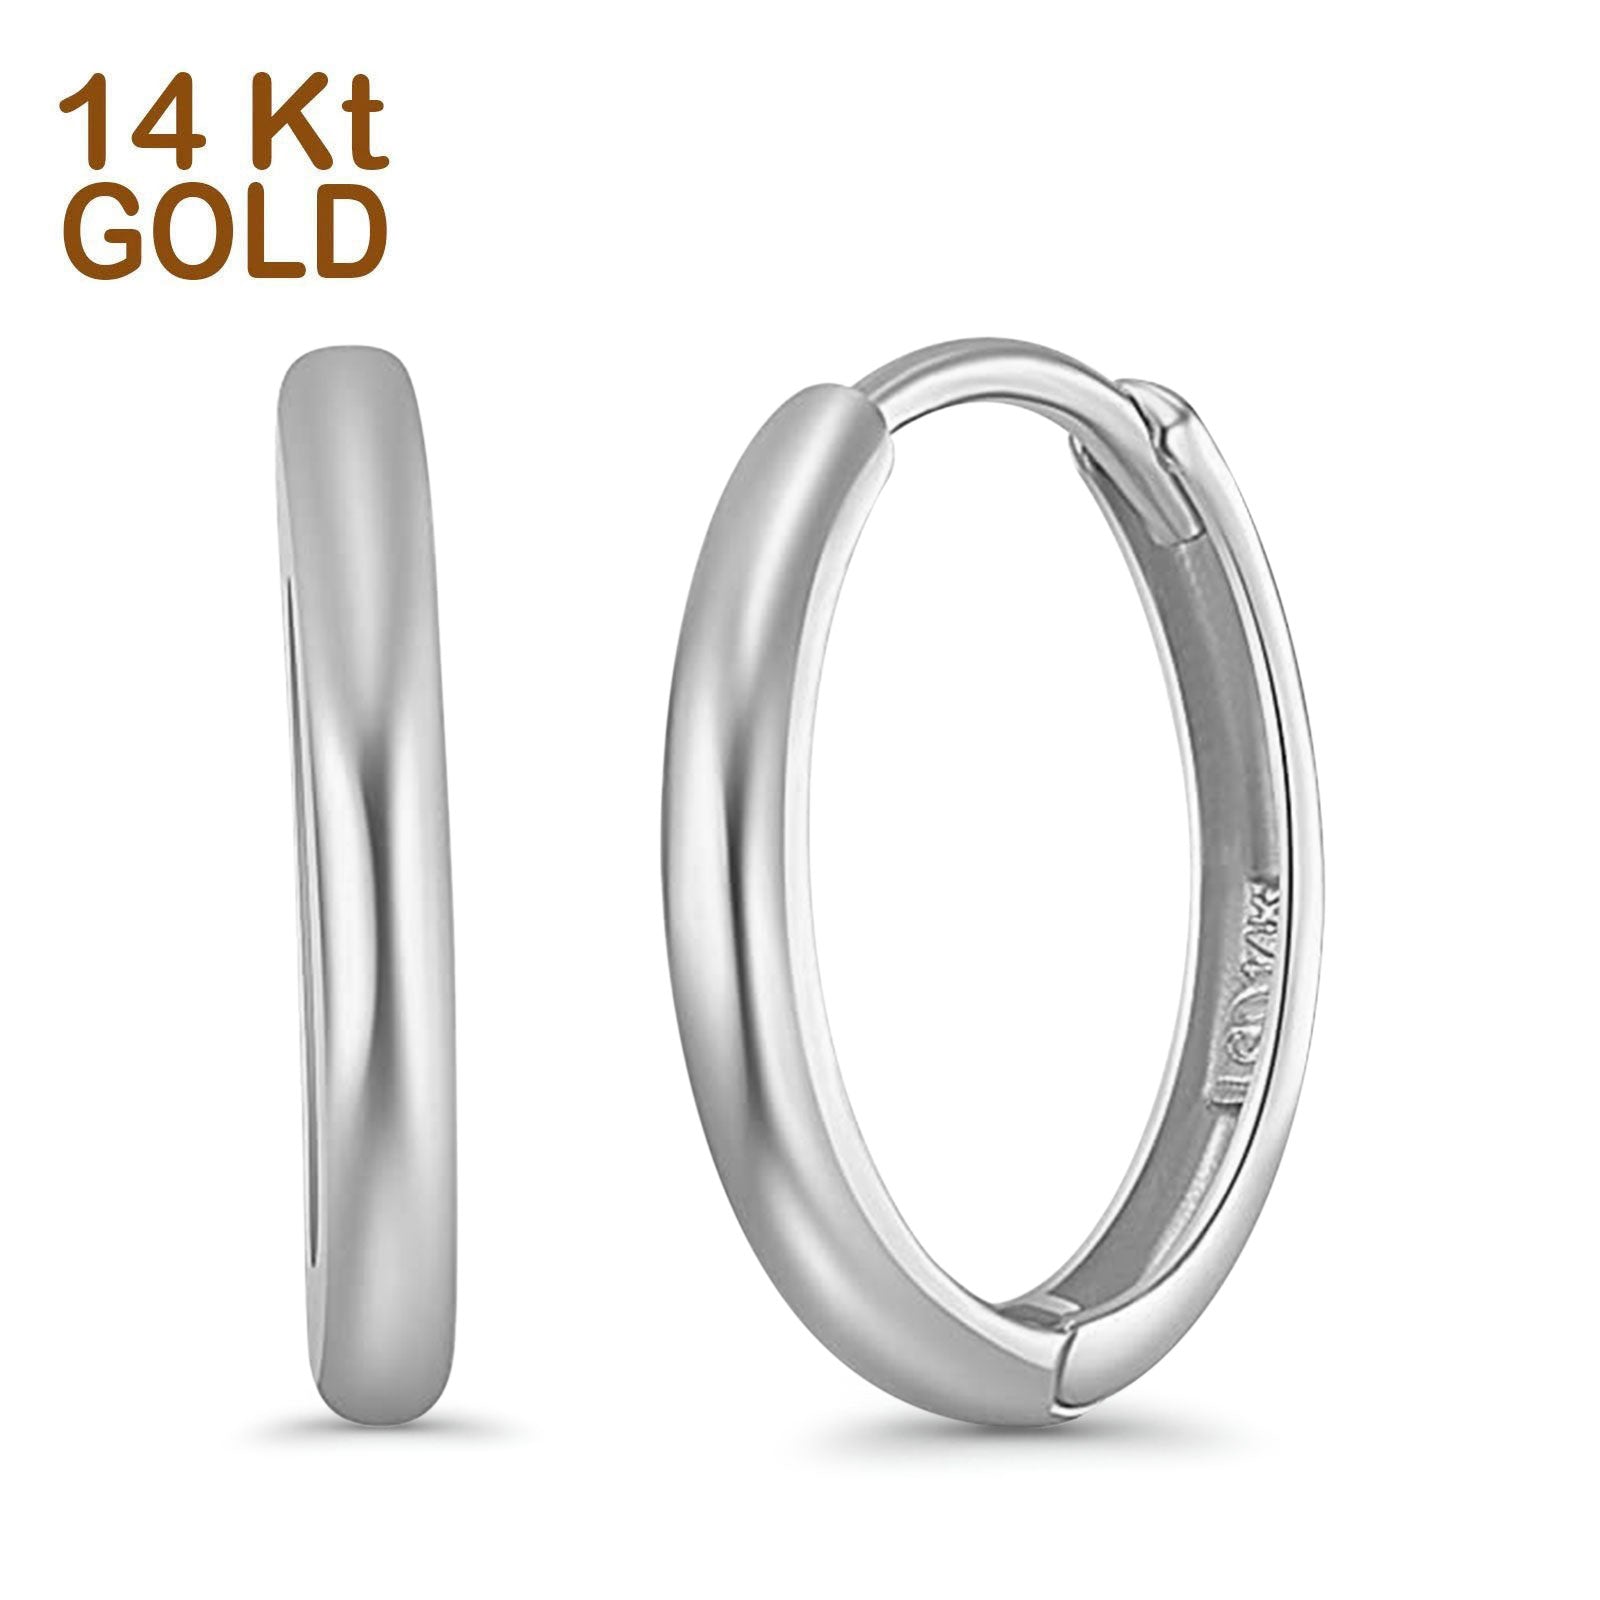 14k White Gold Round Hoop Huggie Earrings - 3 Different Size Available, Best Birthday Gift for Her